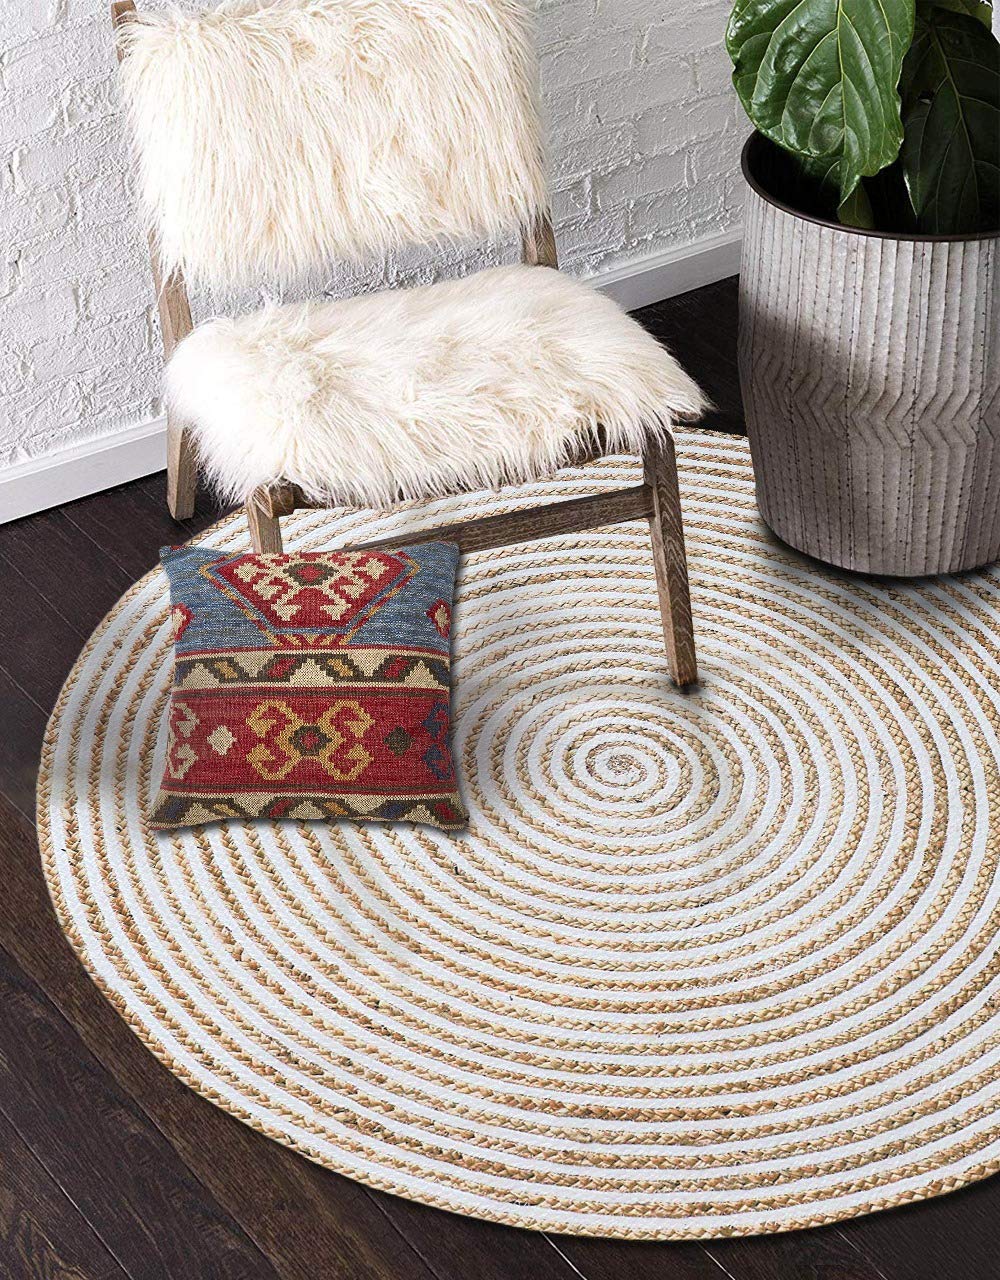 Buy Fernish Decor Jute & Cotton Round Hand Woven, Reversible Carpet Braided  Rug Fabric Border, Boho Look for Living Room Bedroom (Multicolour, 120 cm  Dia) Online at Low Prices in India 